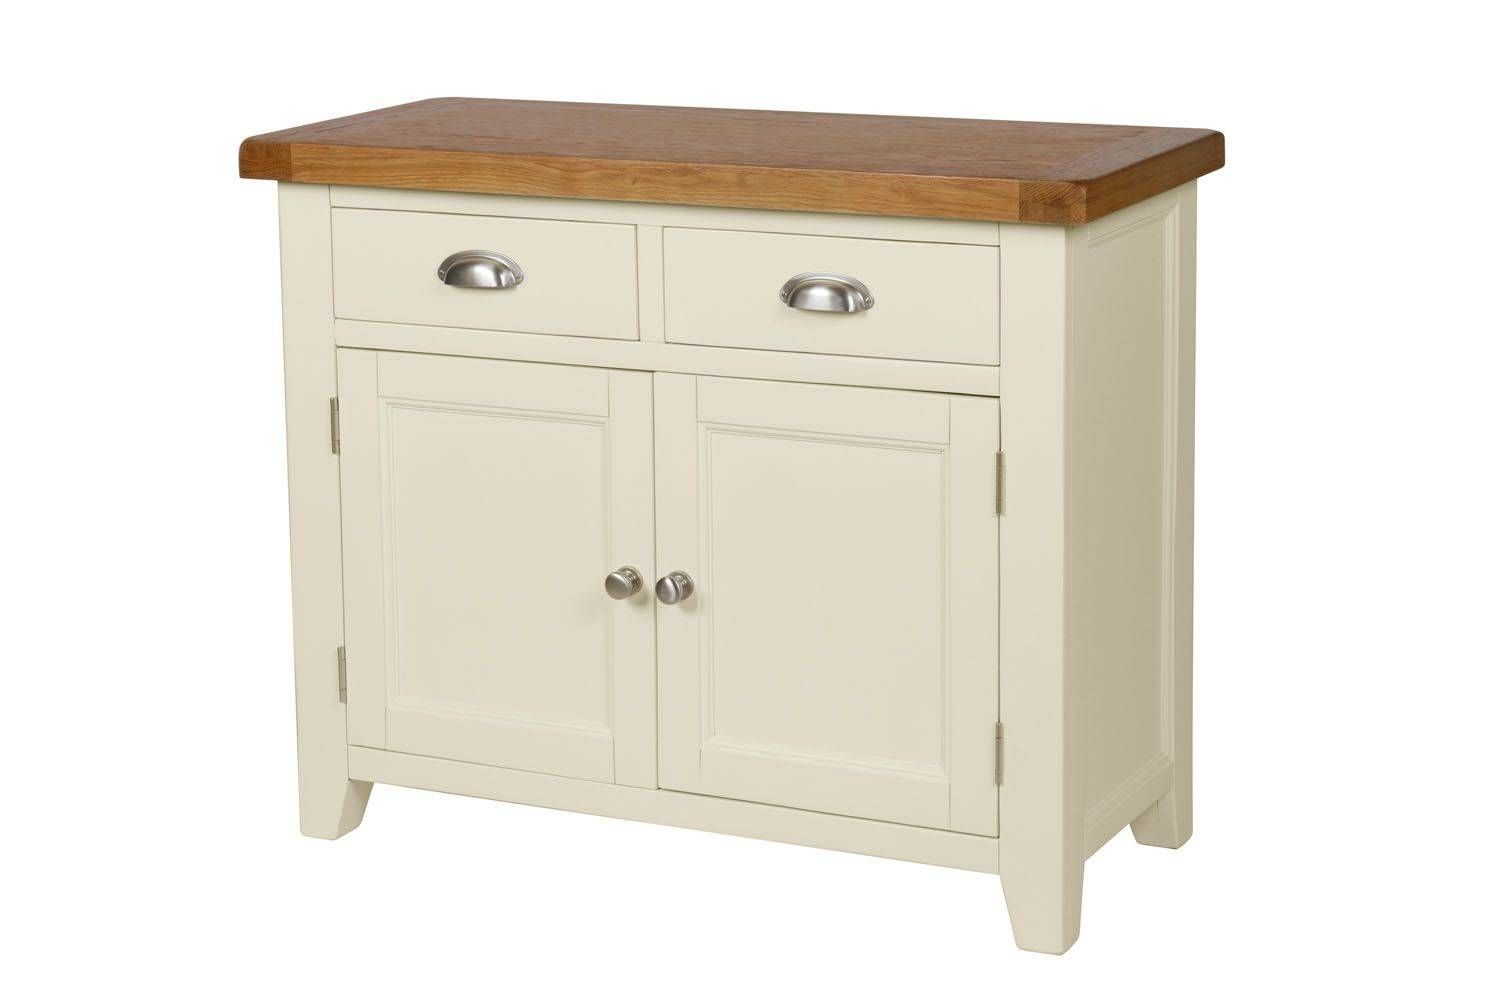 Country Cottage 100cm Cream Painted Oak Sideboard In Painted Sideboards (View 8 of 15)